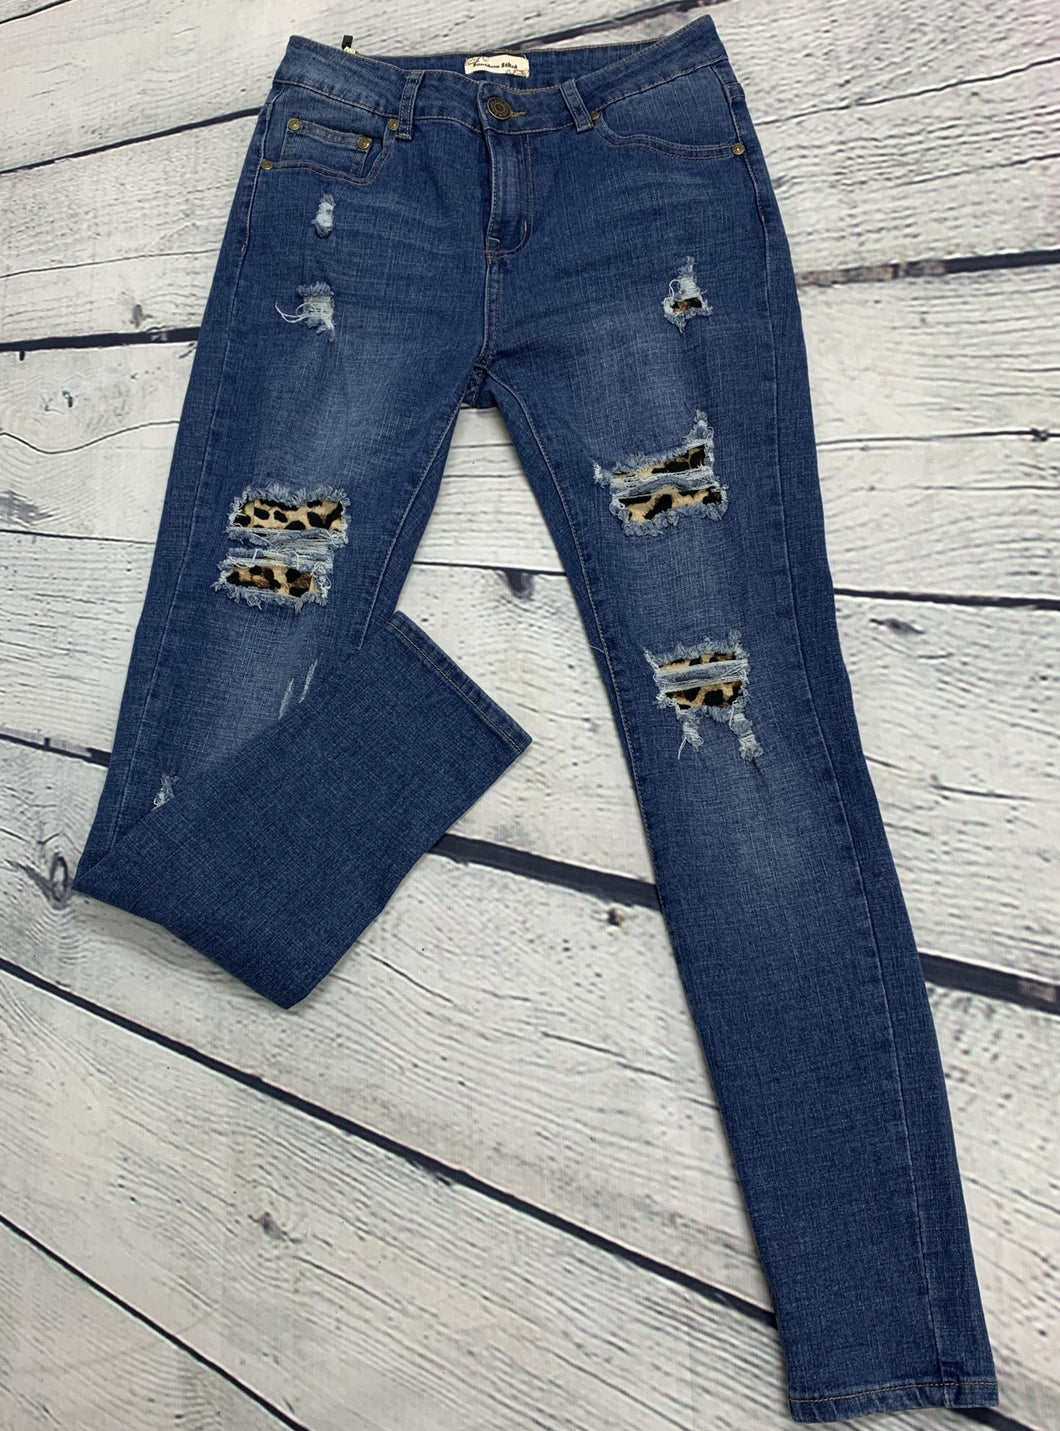 Denim Jeans with Leopard Patches